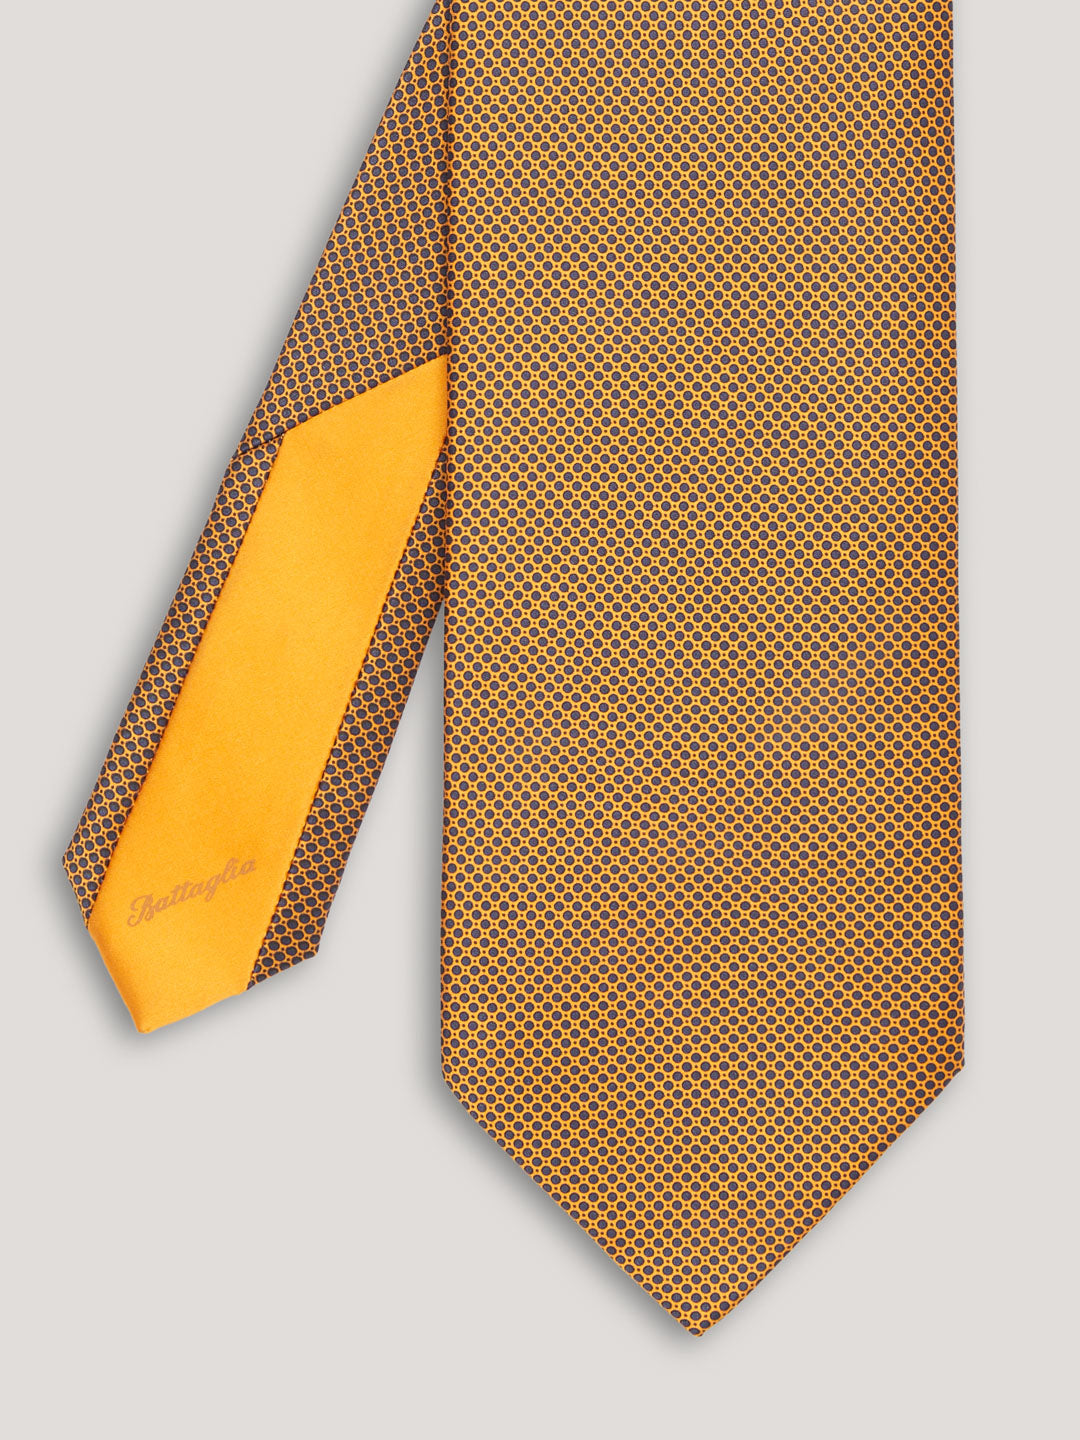 Yellow tie with small black pattern design.  